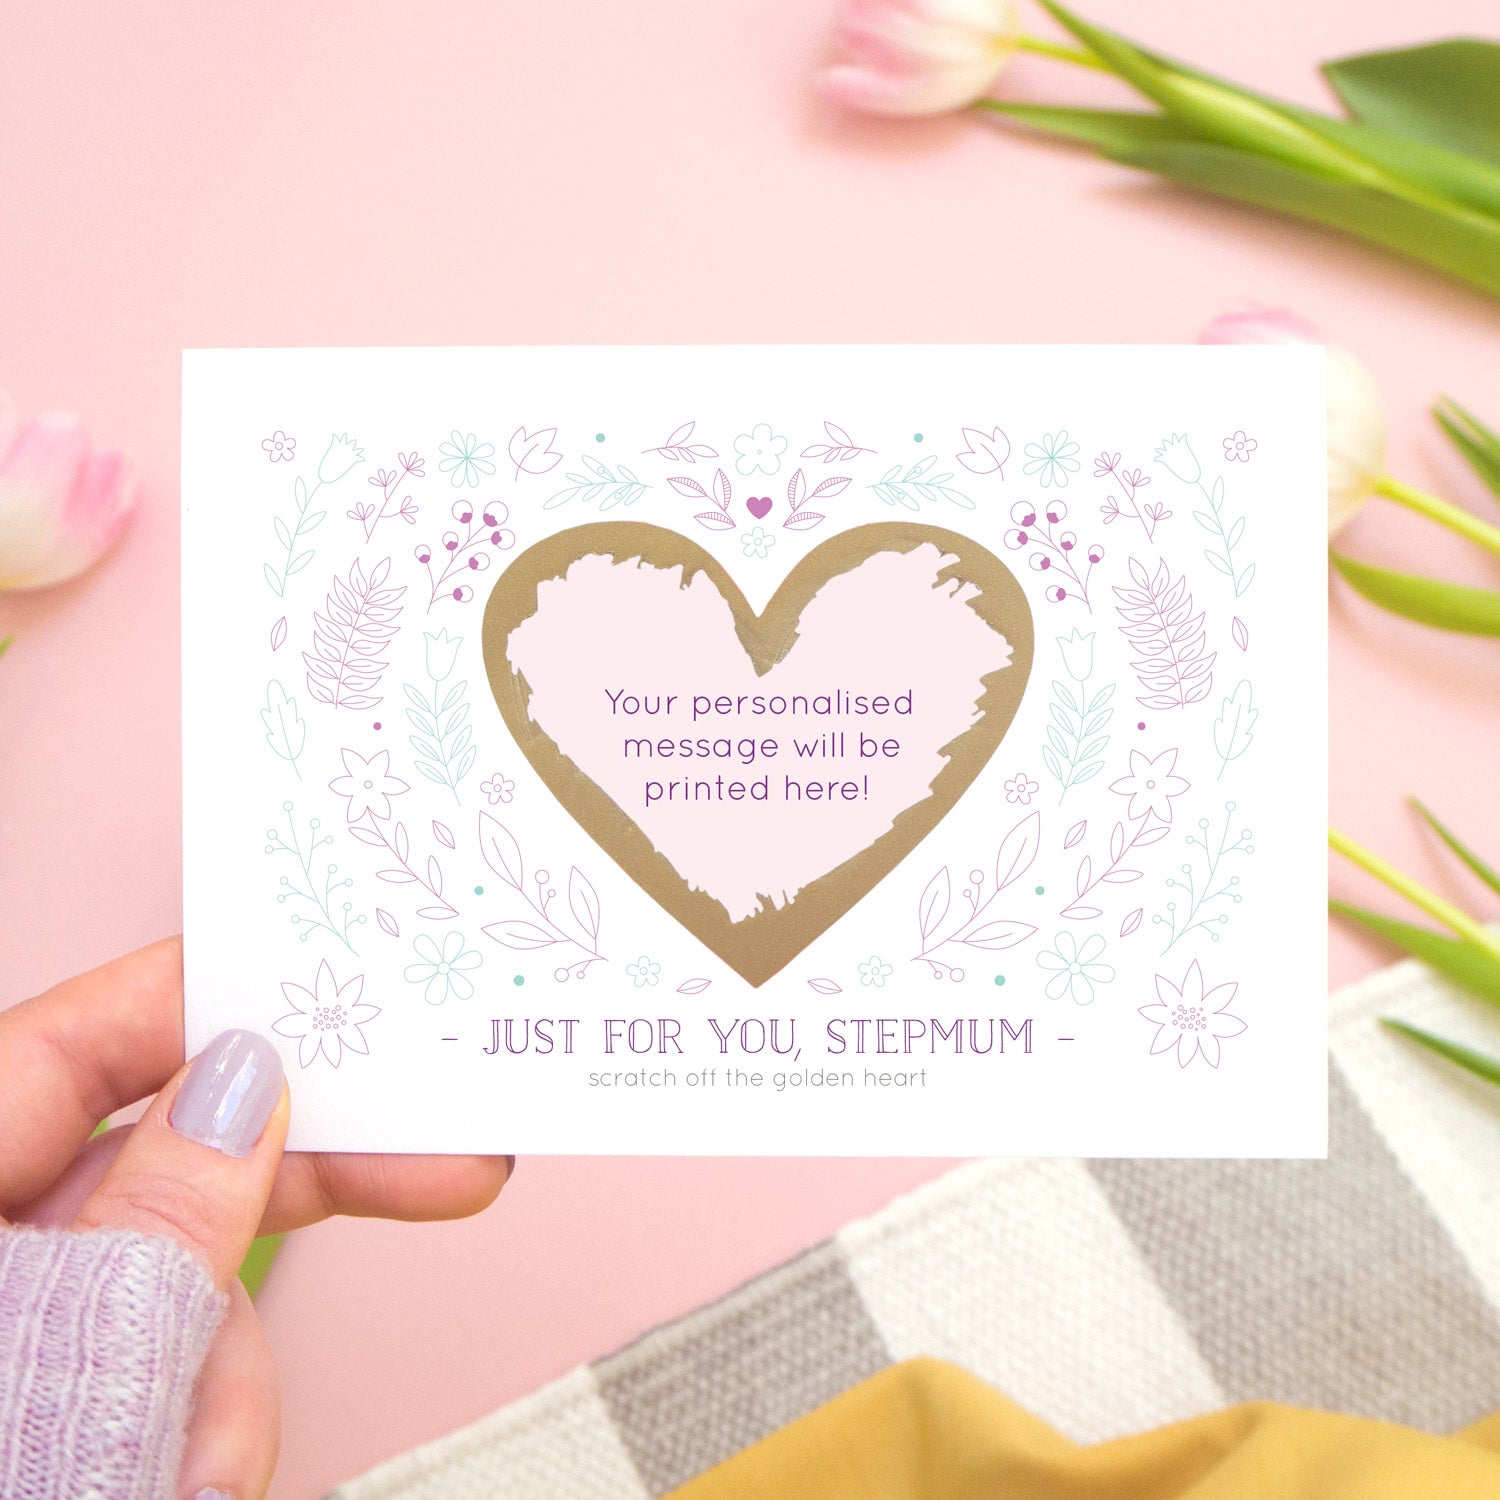 Just for you stepmum scratch card showing where your personalised message will be printed. The card is held over a pink background with tulips and stripy rug.